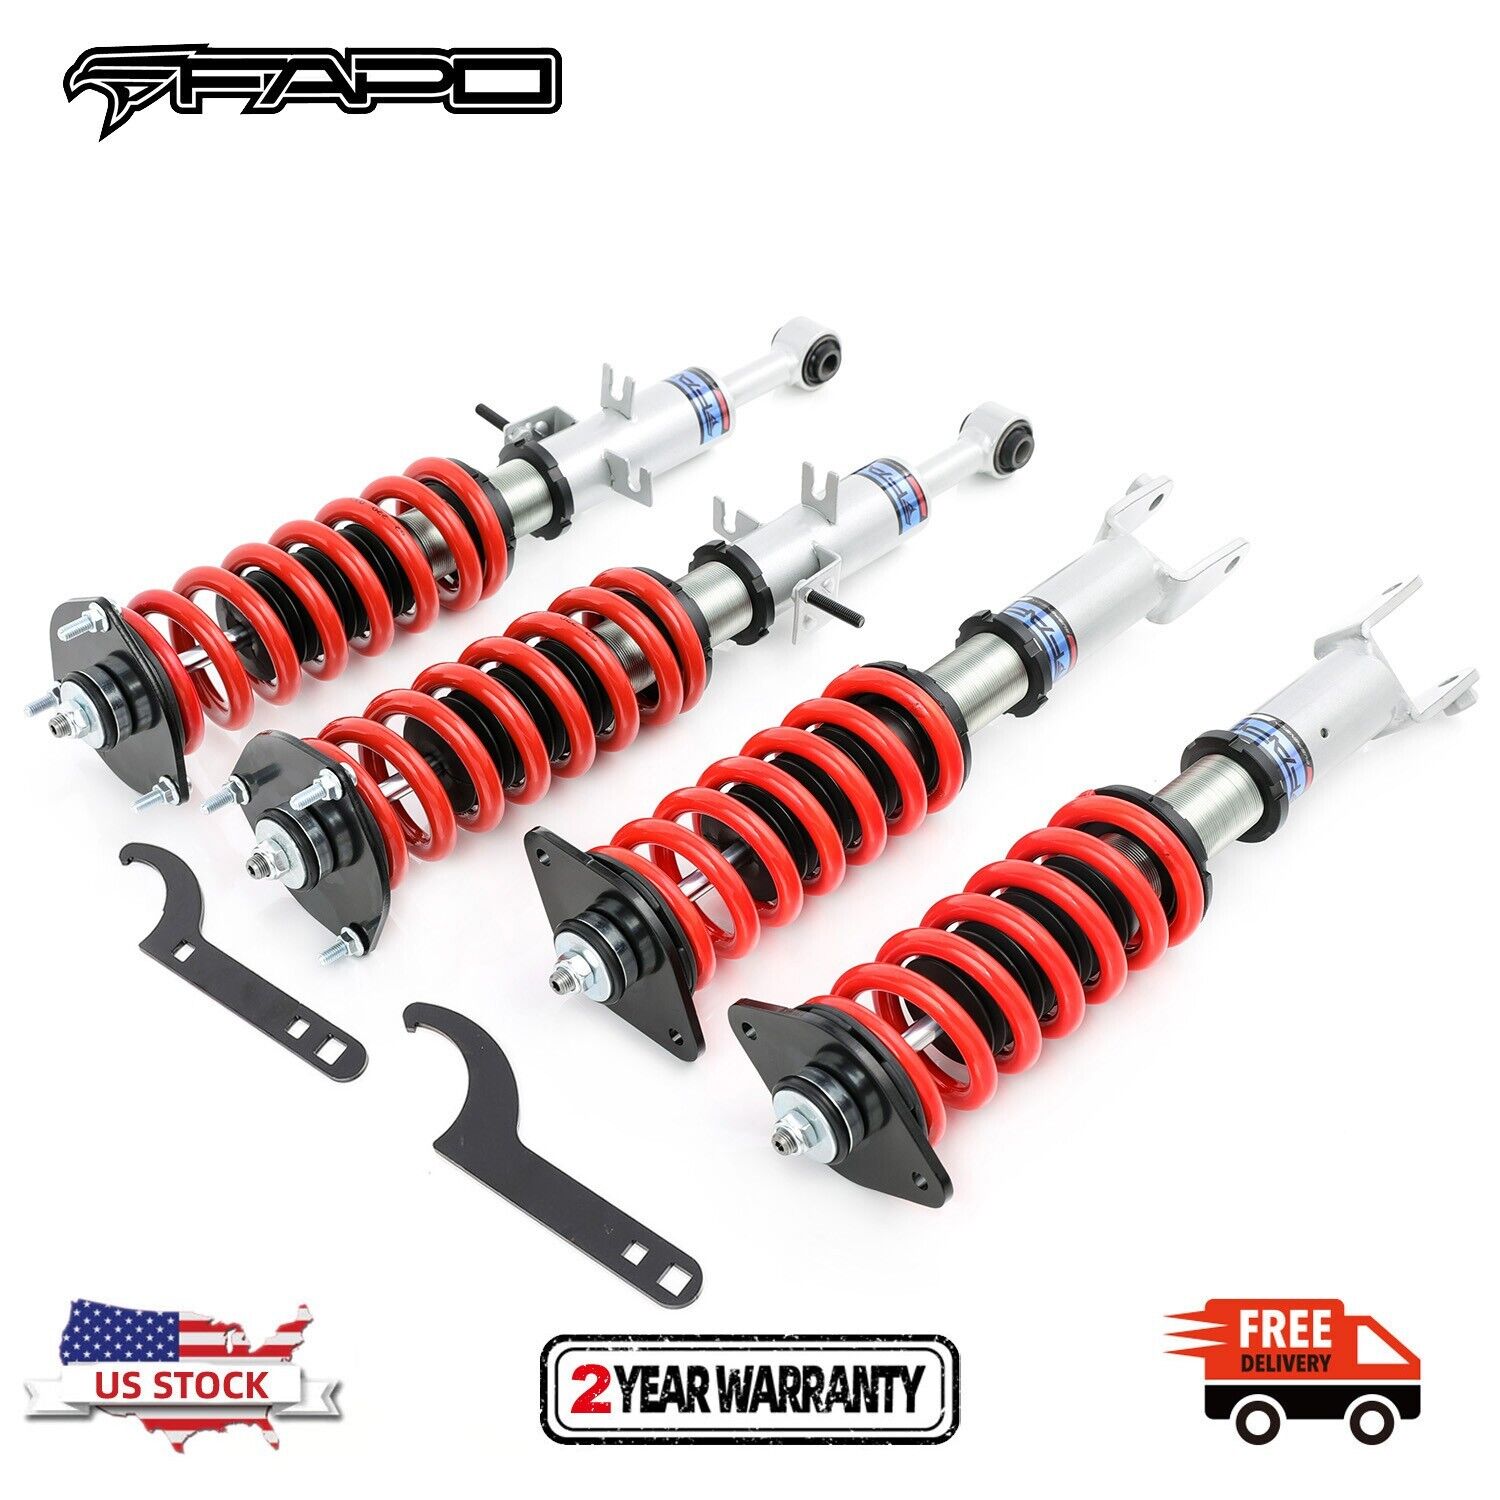 FAPO Coilovers For Nissan 370Z 2009-2016 Infiniti G37 RWD 08-13 Q40 14-15 Q60